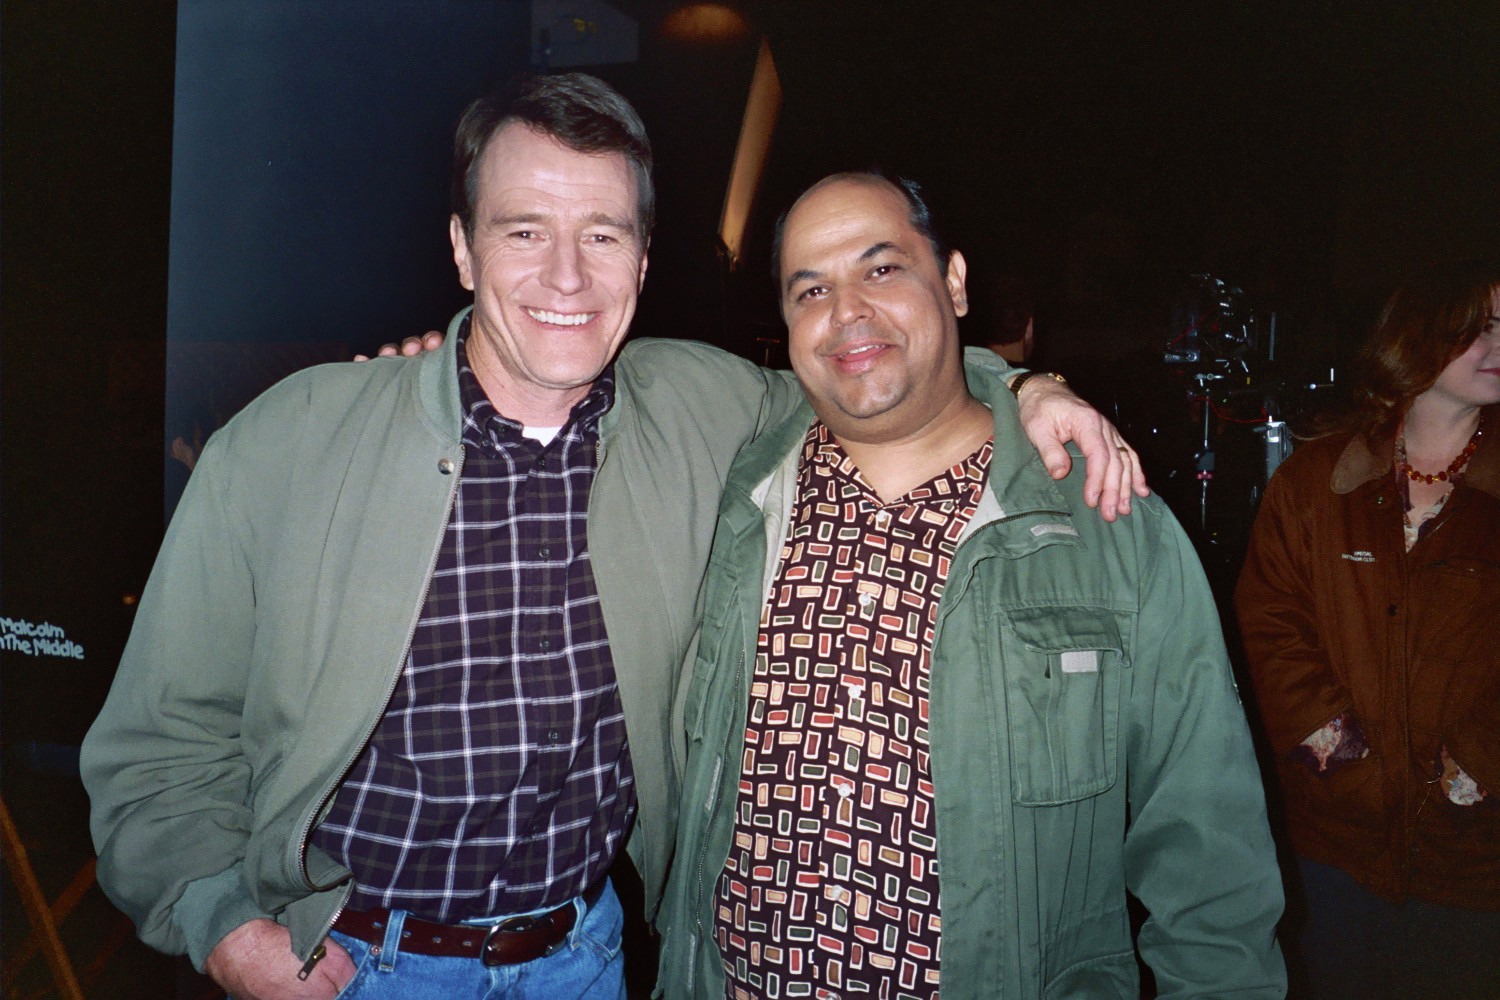 Frank Crim and Bryan Cranston taking a break on the set of Malcolm In The Middle